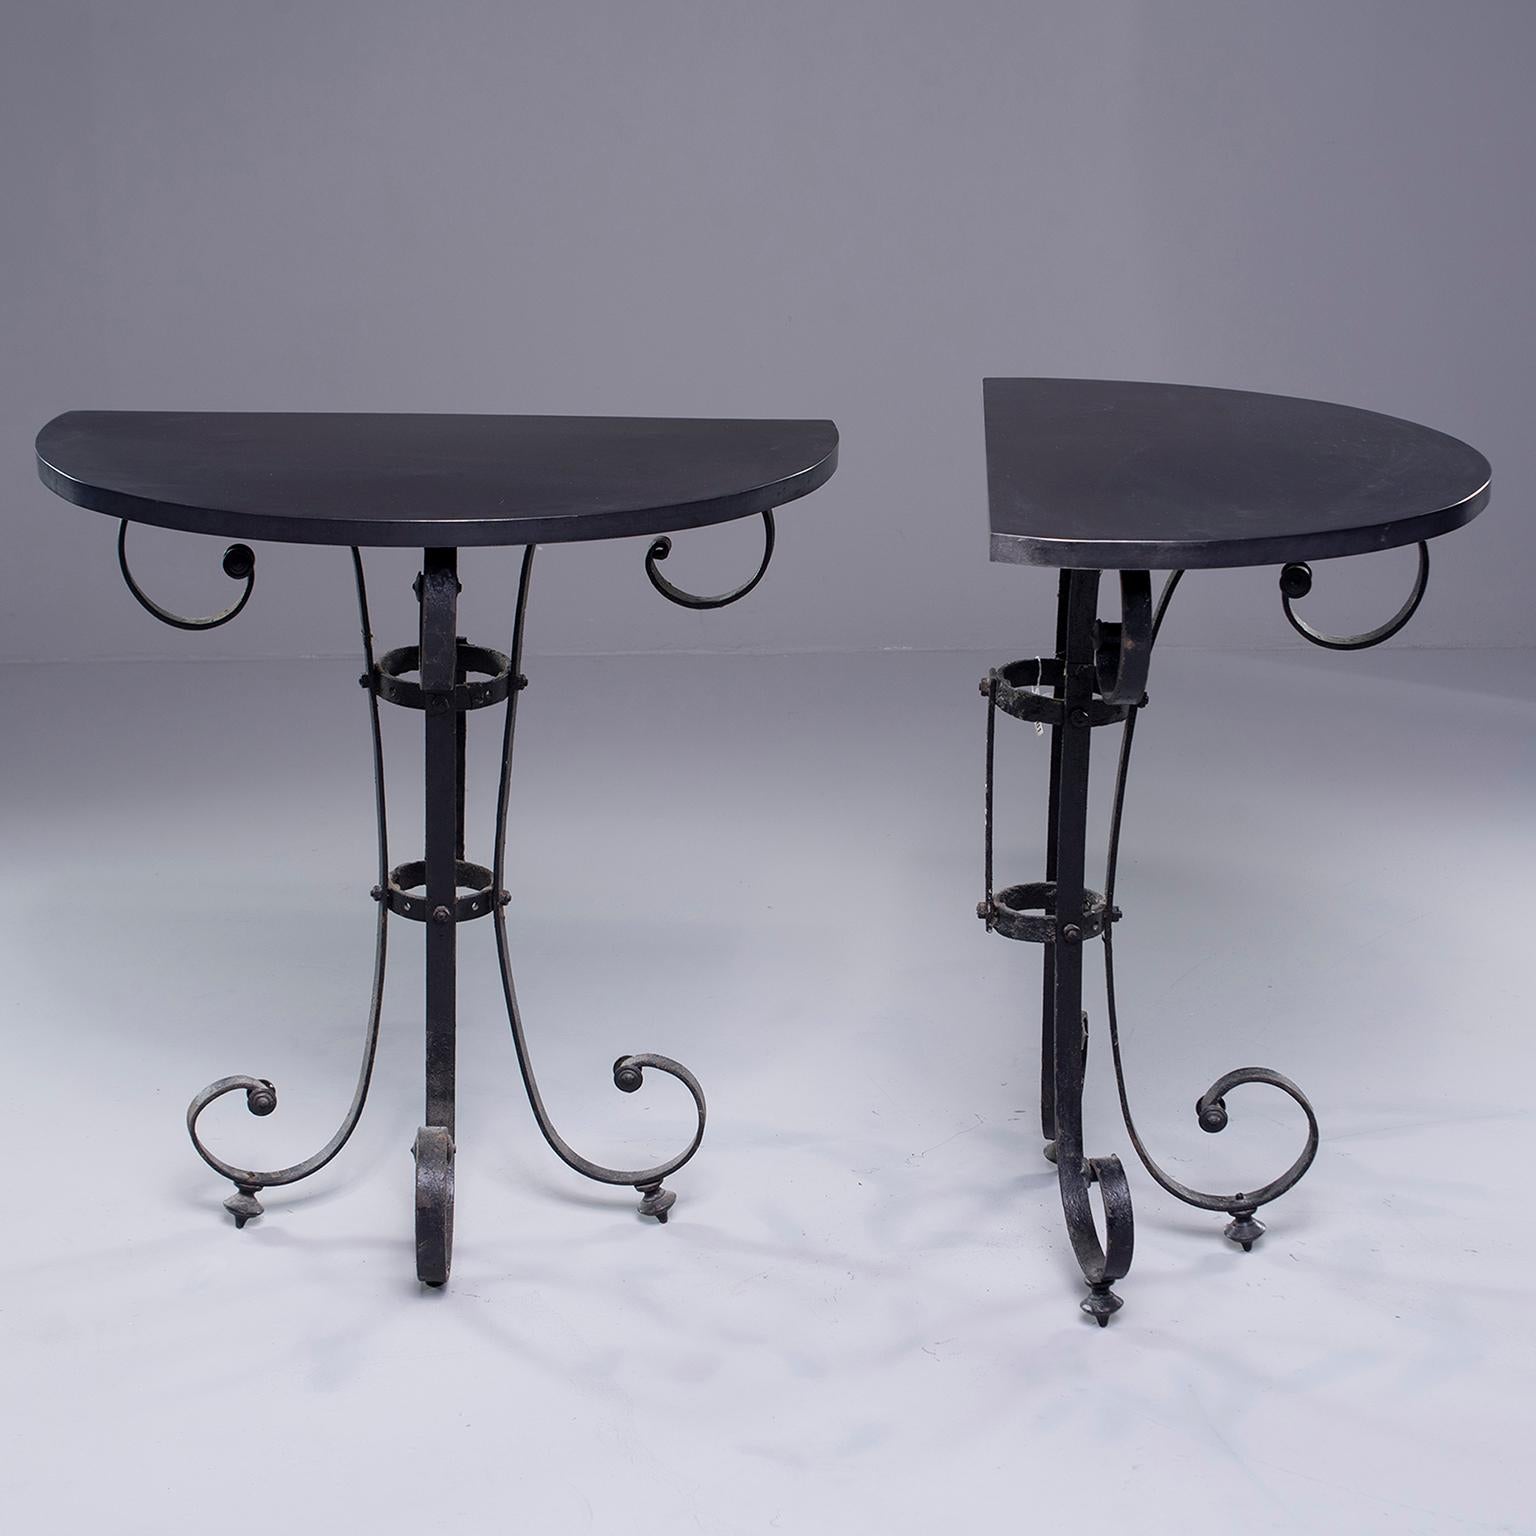 19th Century Pair of Demilune Consoles with Italian Iron Candelabra Base and Black Metal Tops